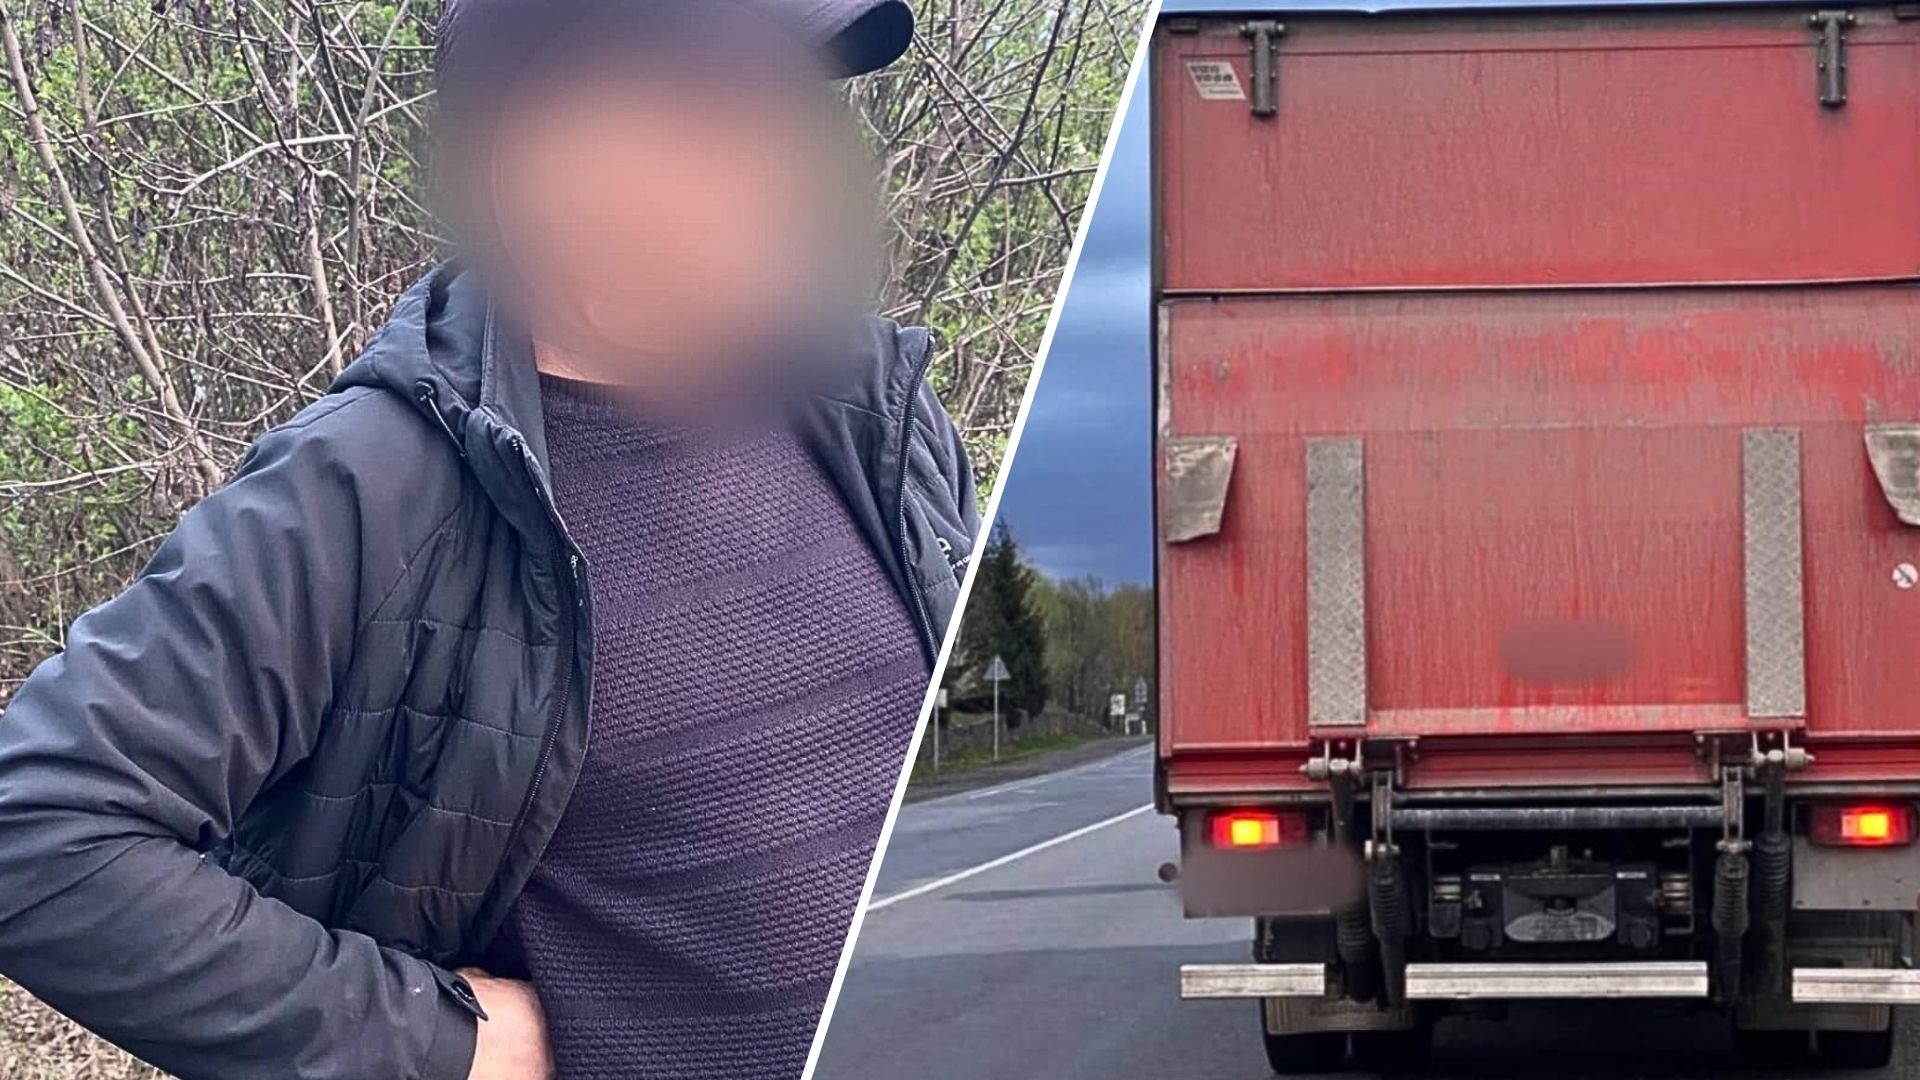 Yesterday, at about 6 p.m., patrol police officers of Transcarpathian region stopped a driver who violated traffic rules, driving a Volvo truck.